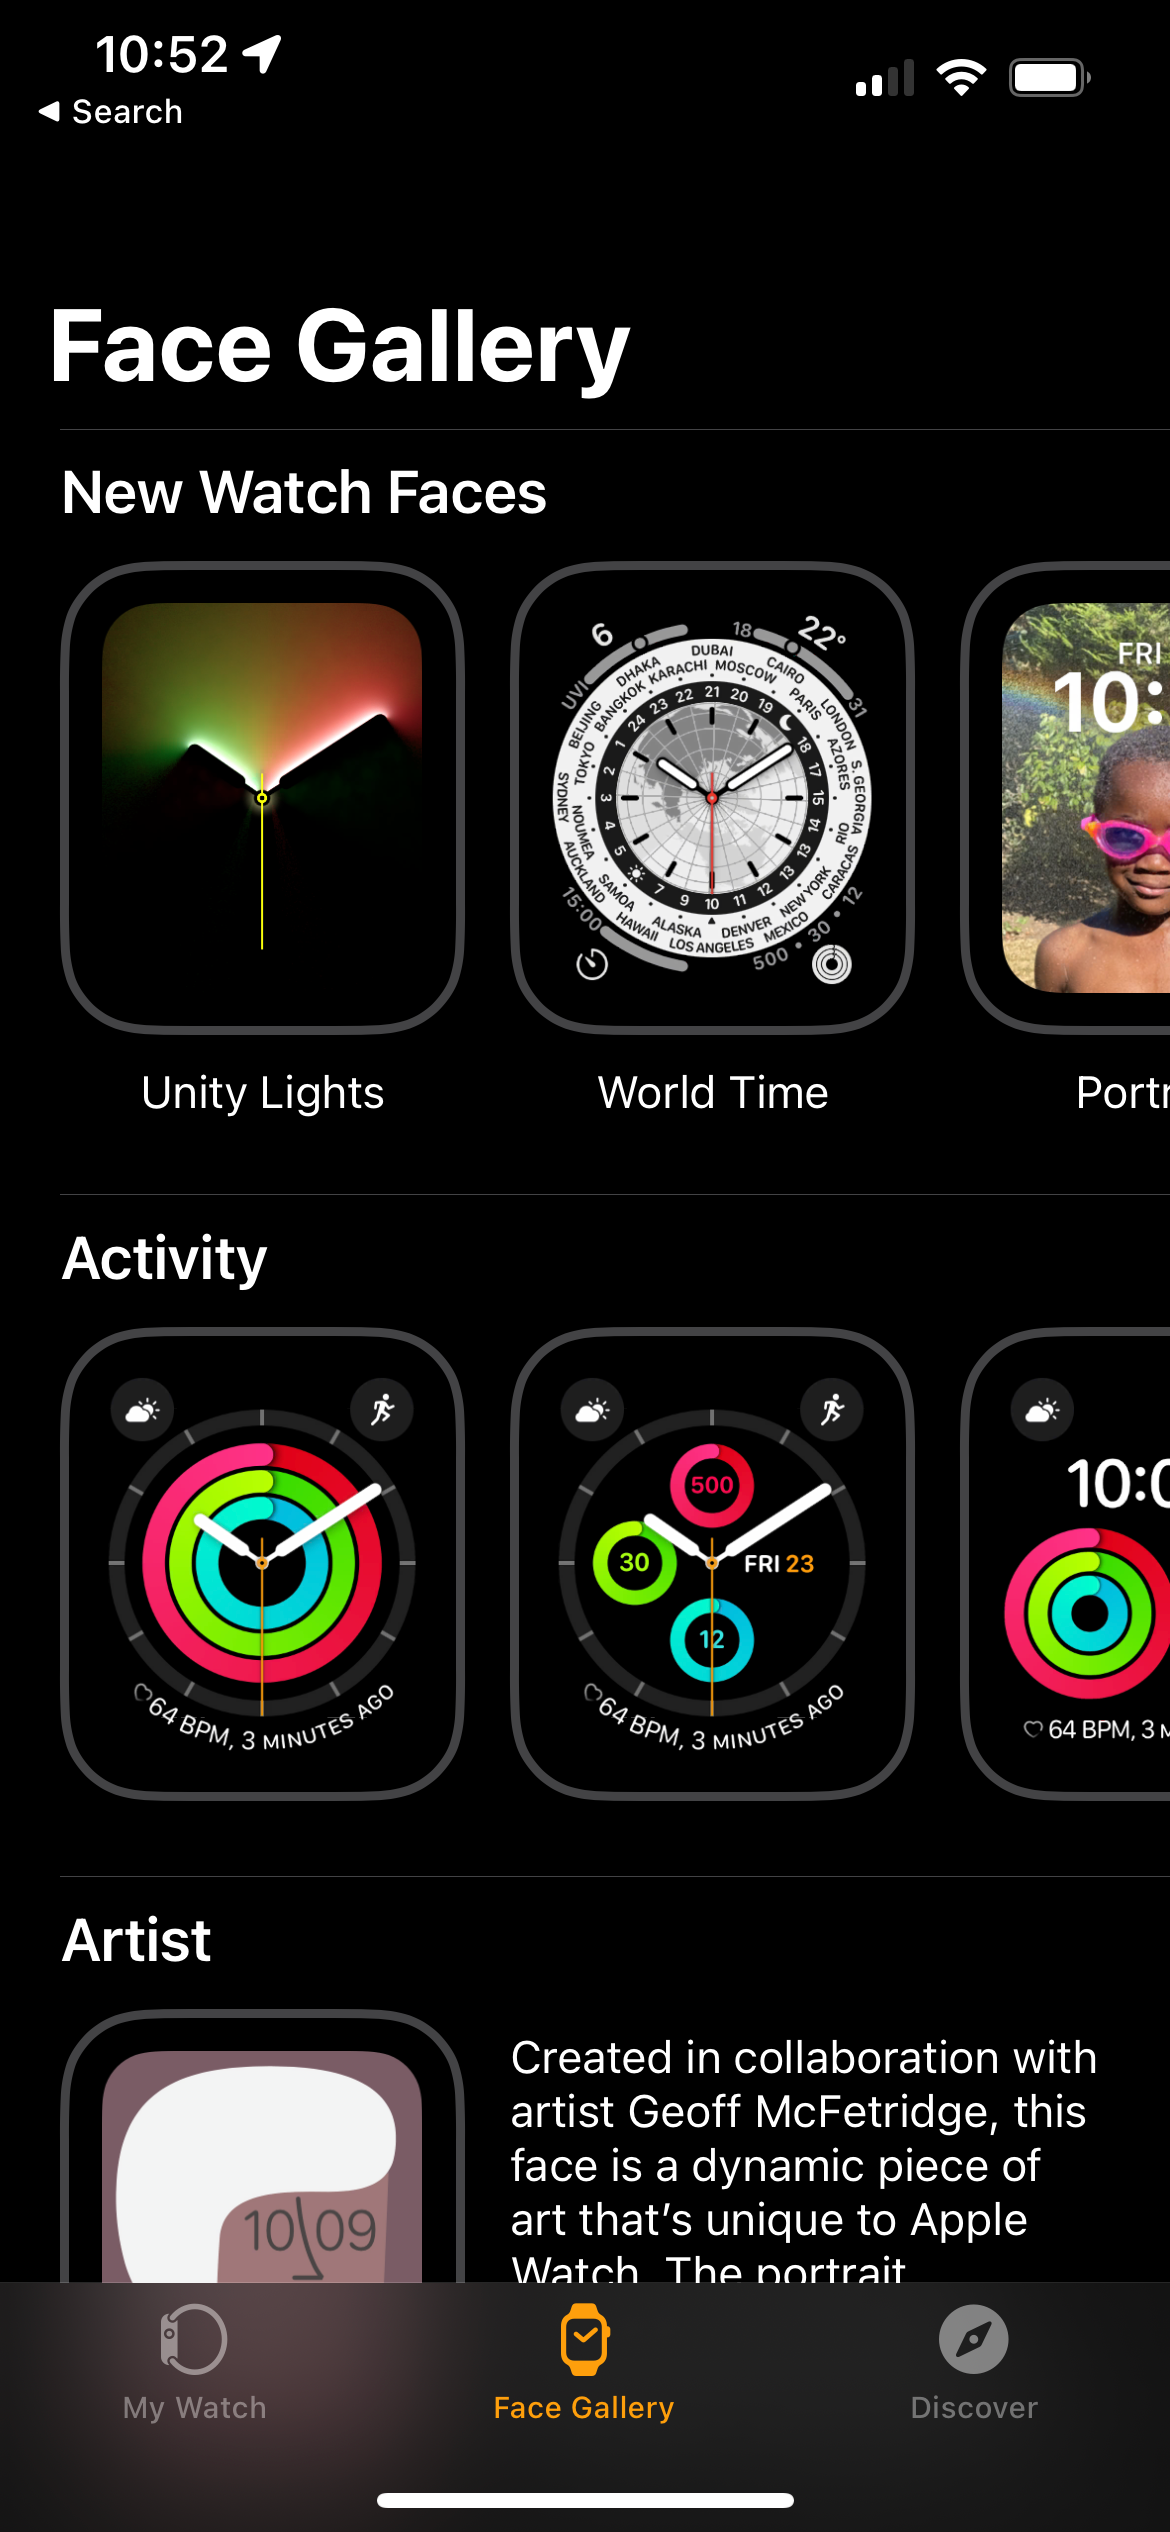 Find a new watch face that you like